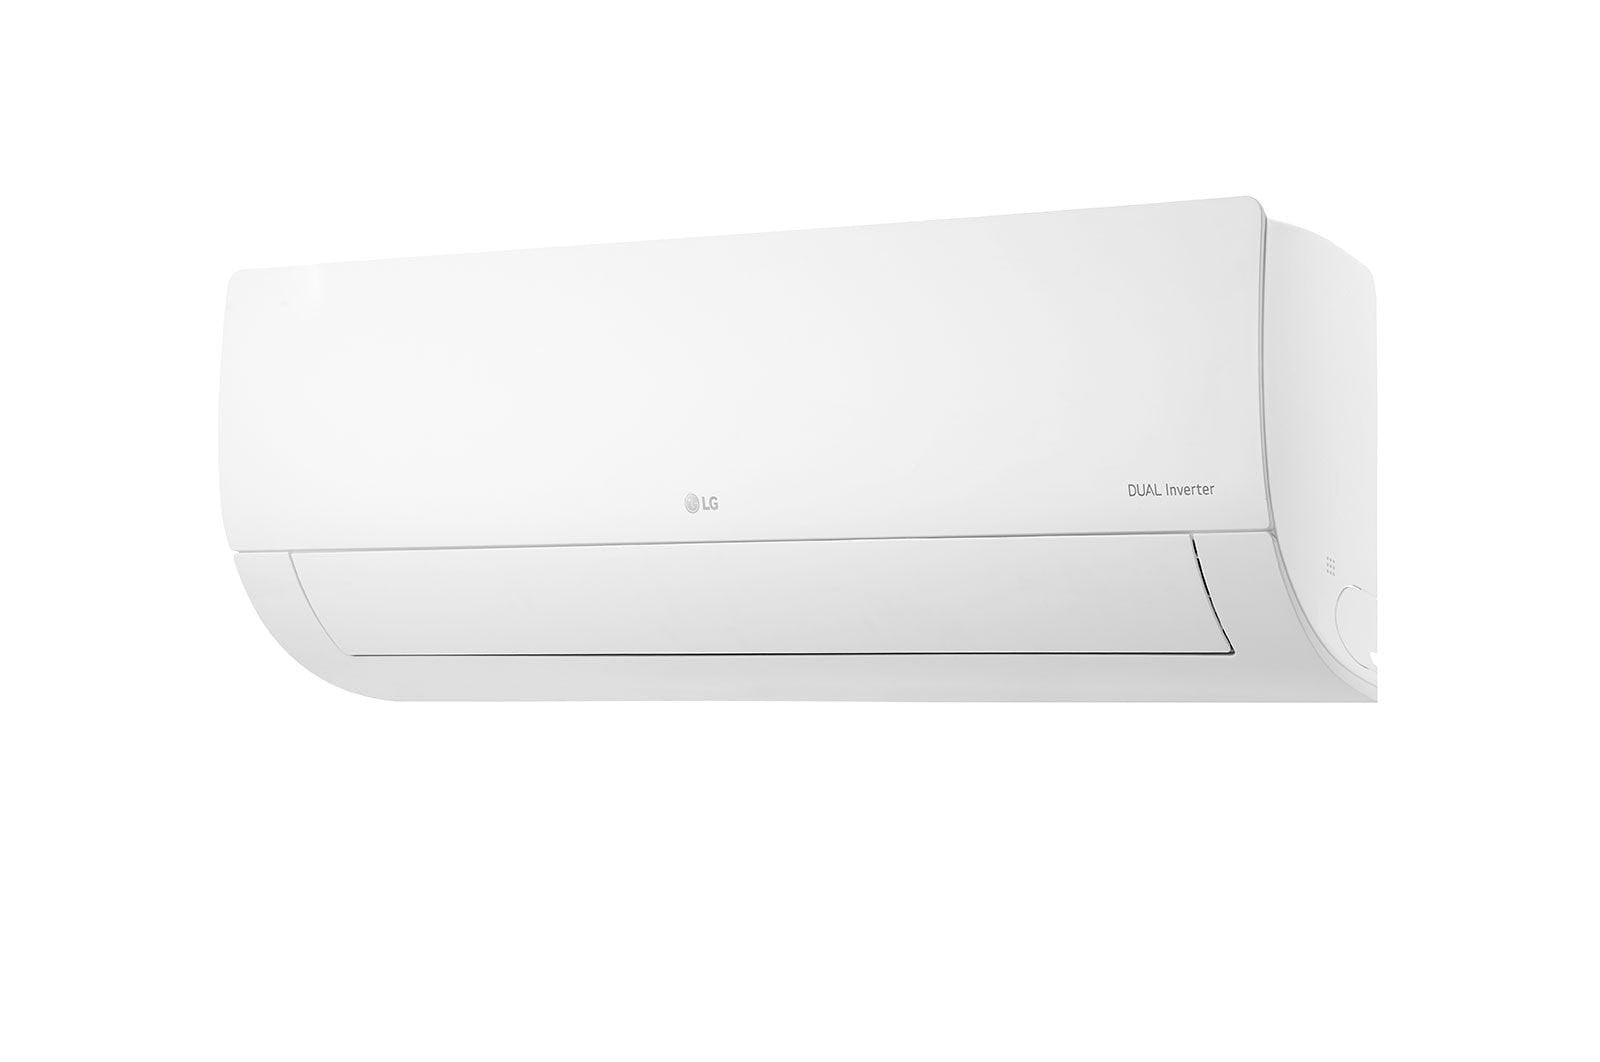 LG Dual Inverter Split Air Conditioner, Cooling Only, 1.5 HP, White - S4-Q12JA3AE